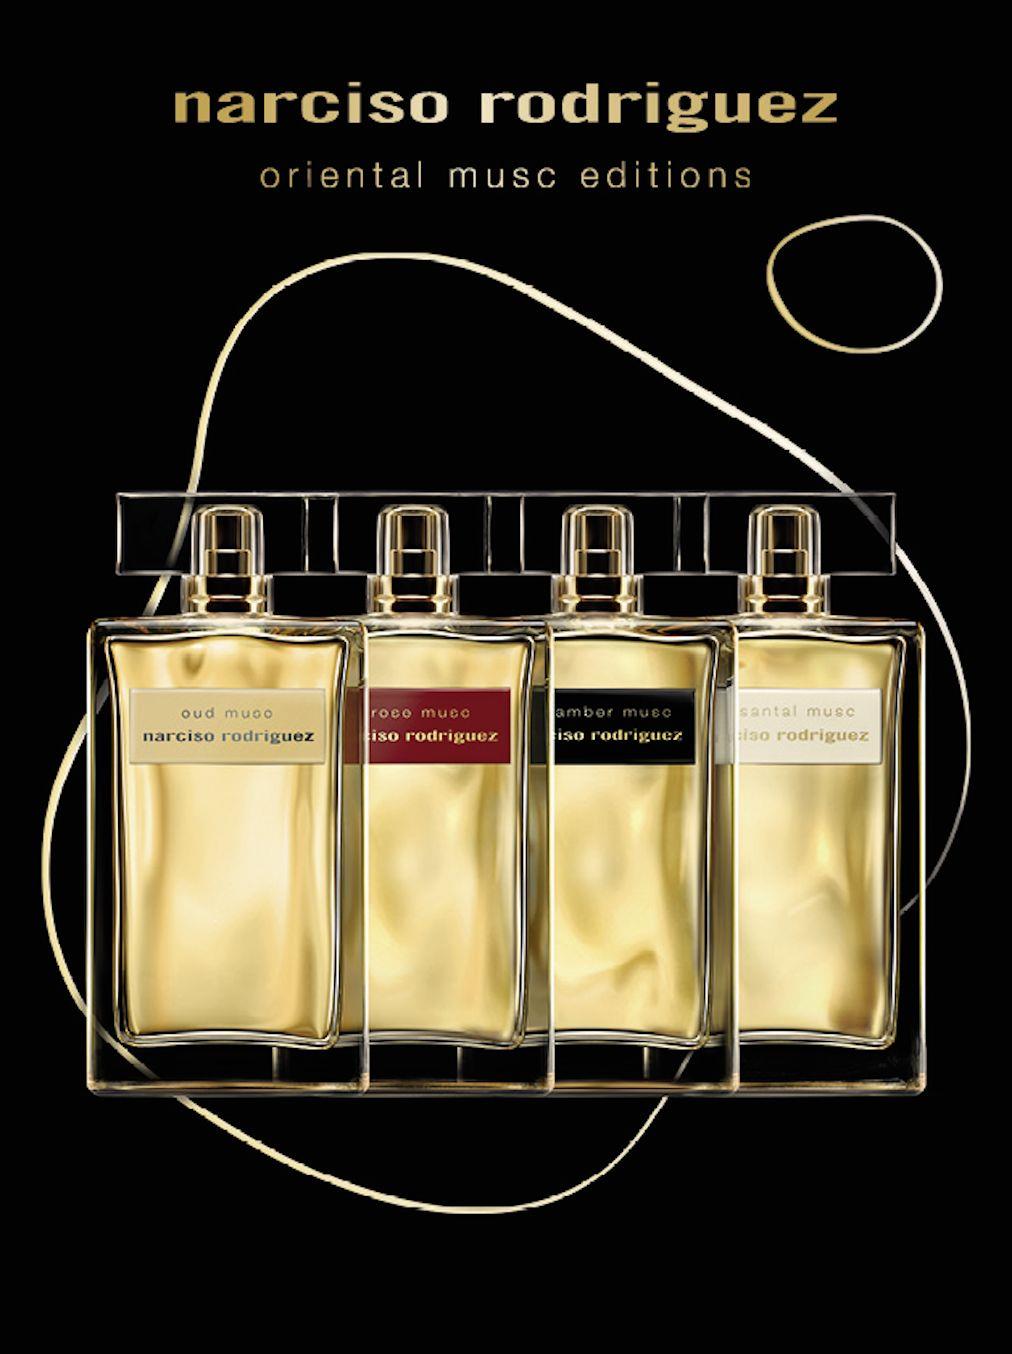 Buy Narciso Rodriguez Amber Musc oil Sample - perfume samples & decants -  The Perfumed Court